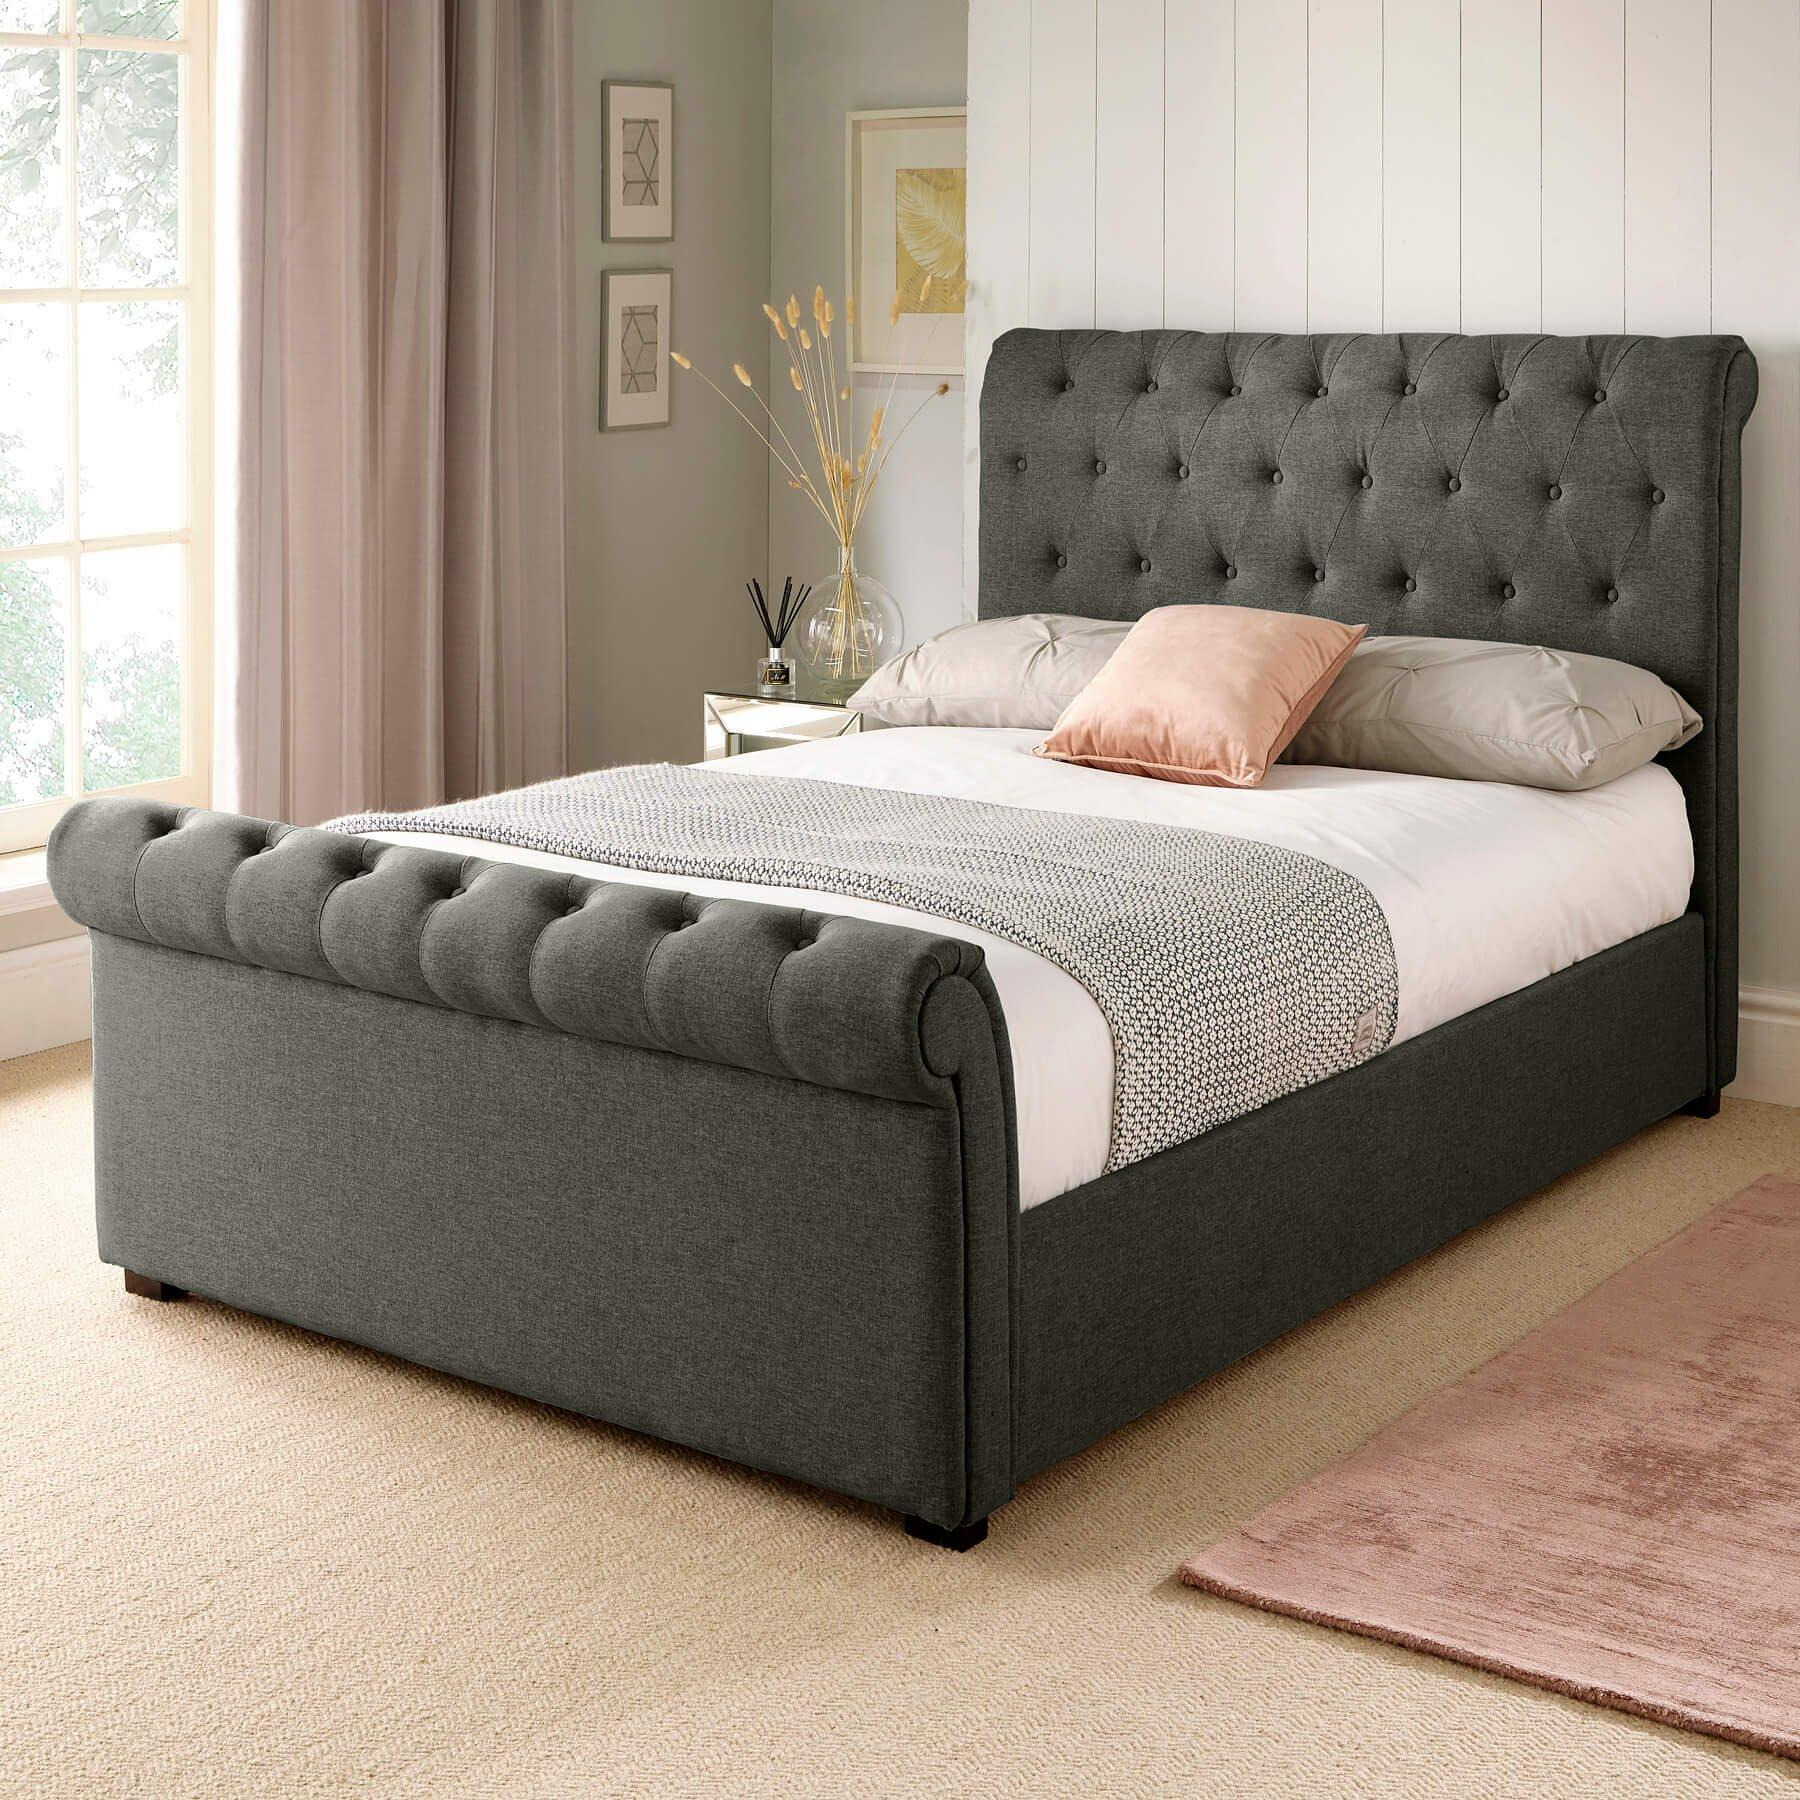 Chester Fabric Upholstered Bed - image 1